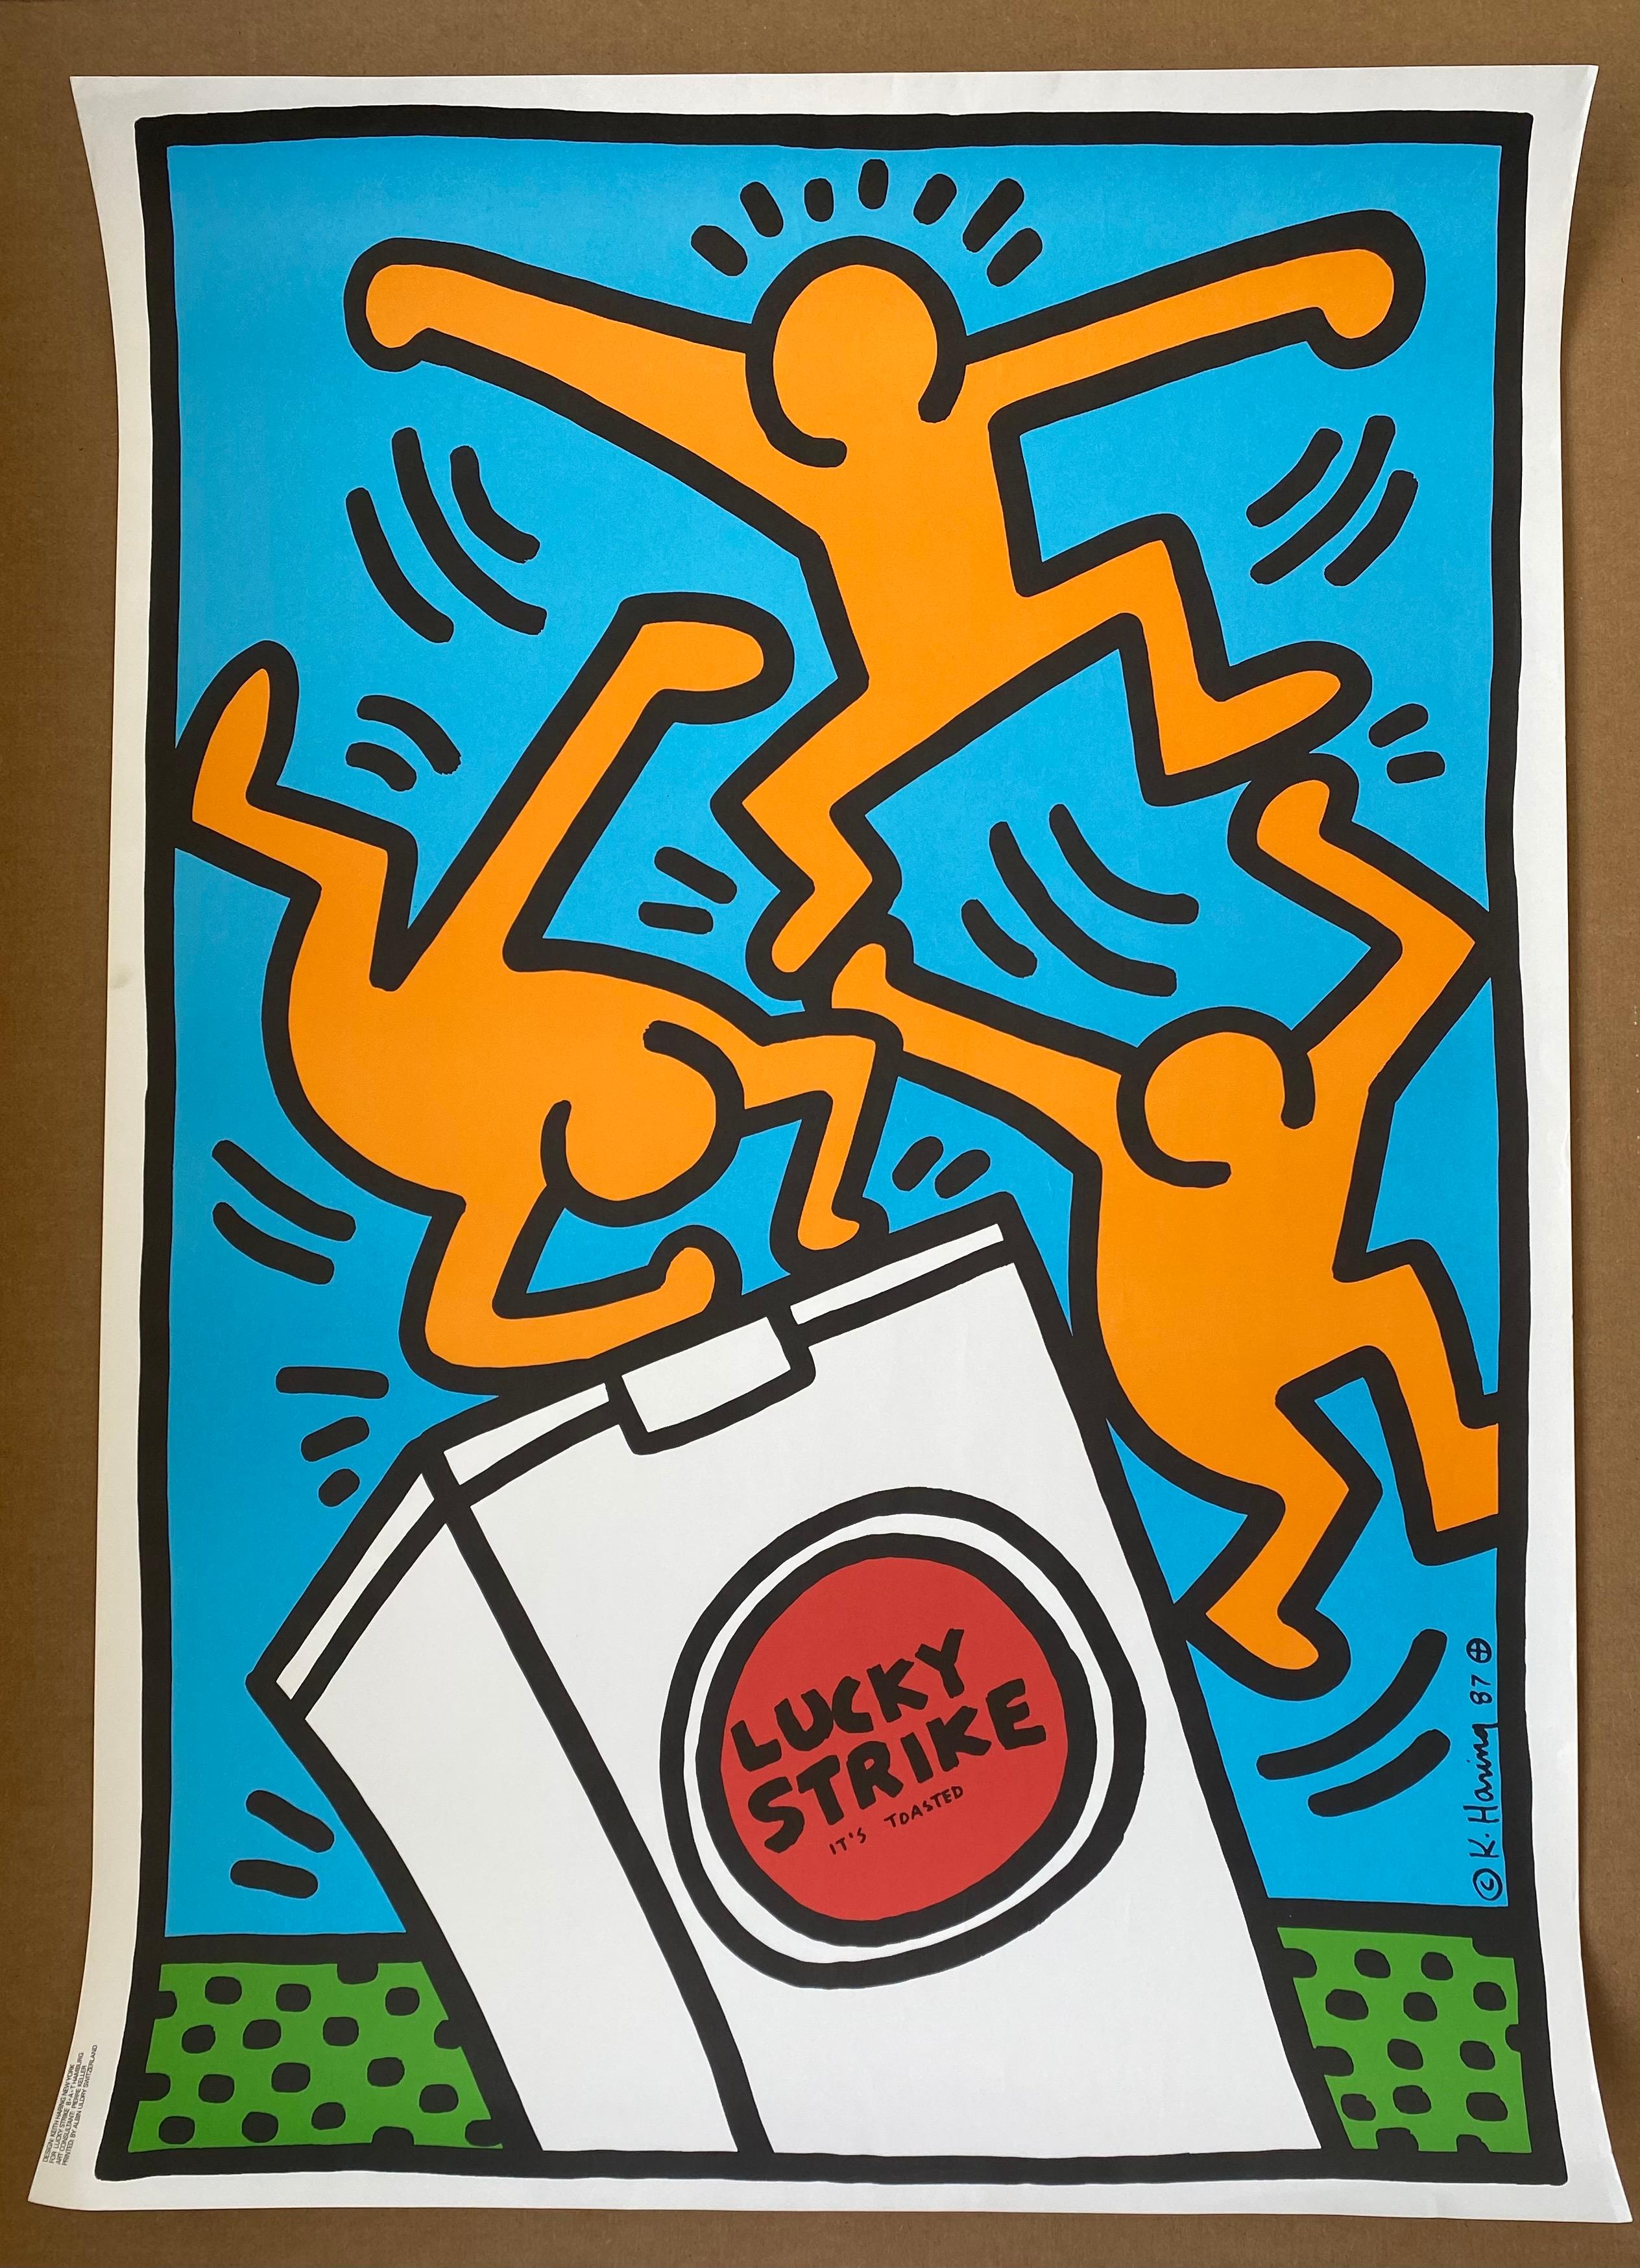 Lucky Strike II - Print by Keith Haring